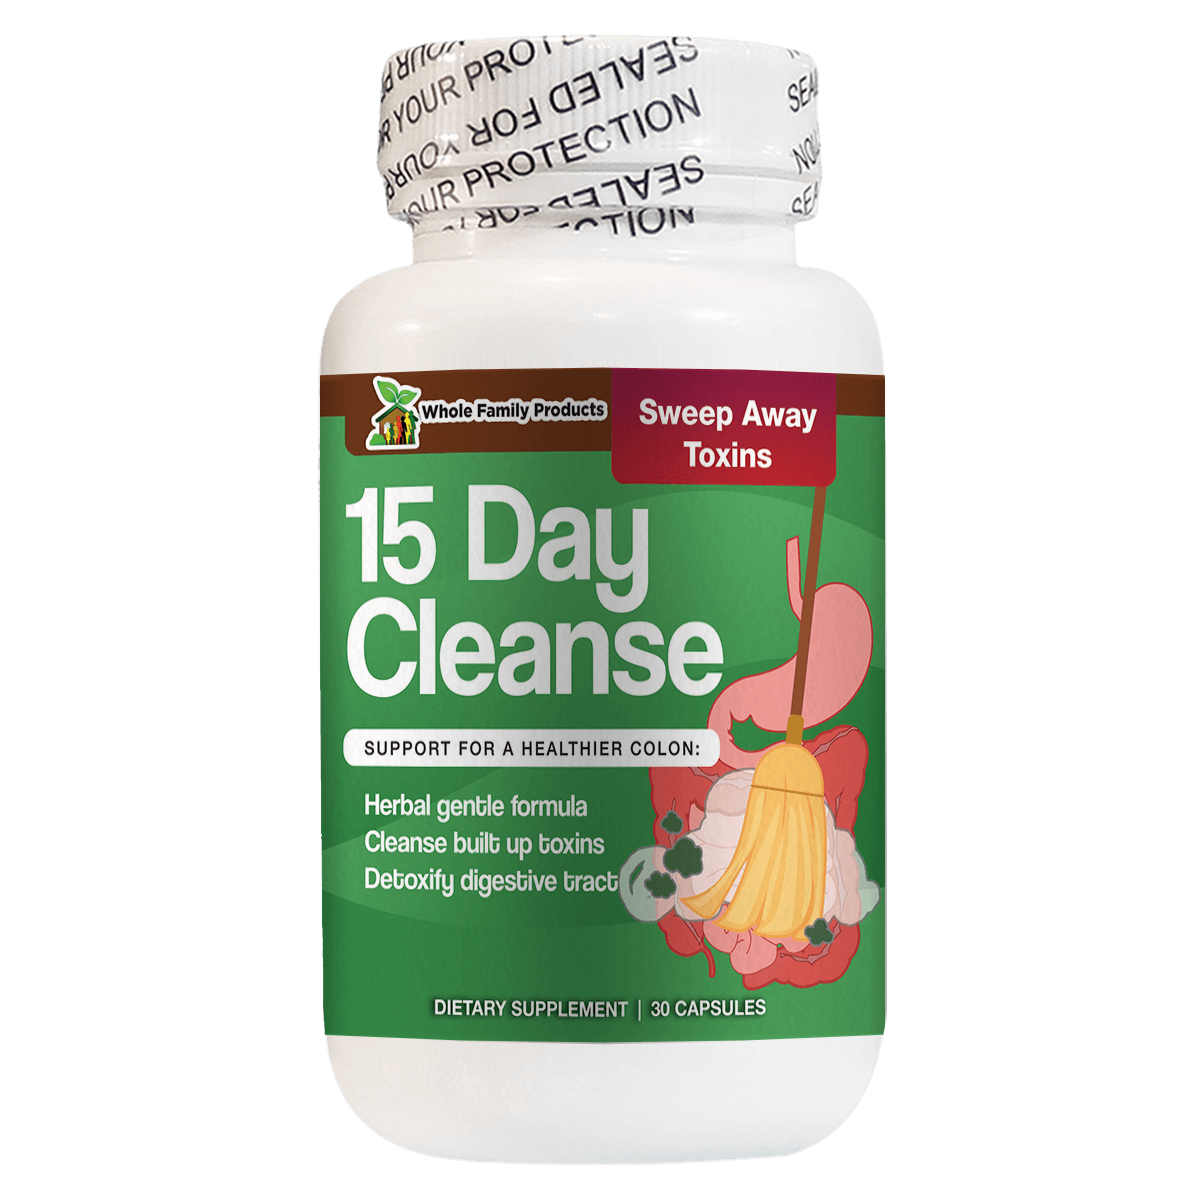 15 Day Cleanse Supplement Help Support Healthier Colon